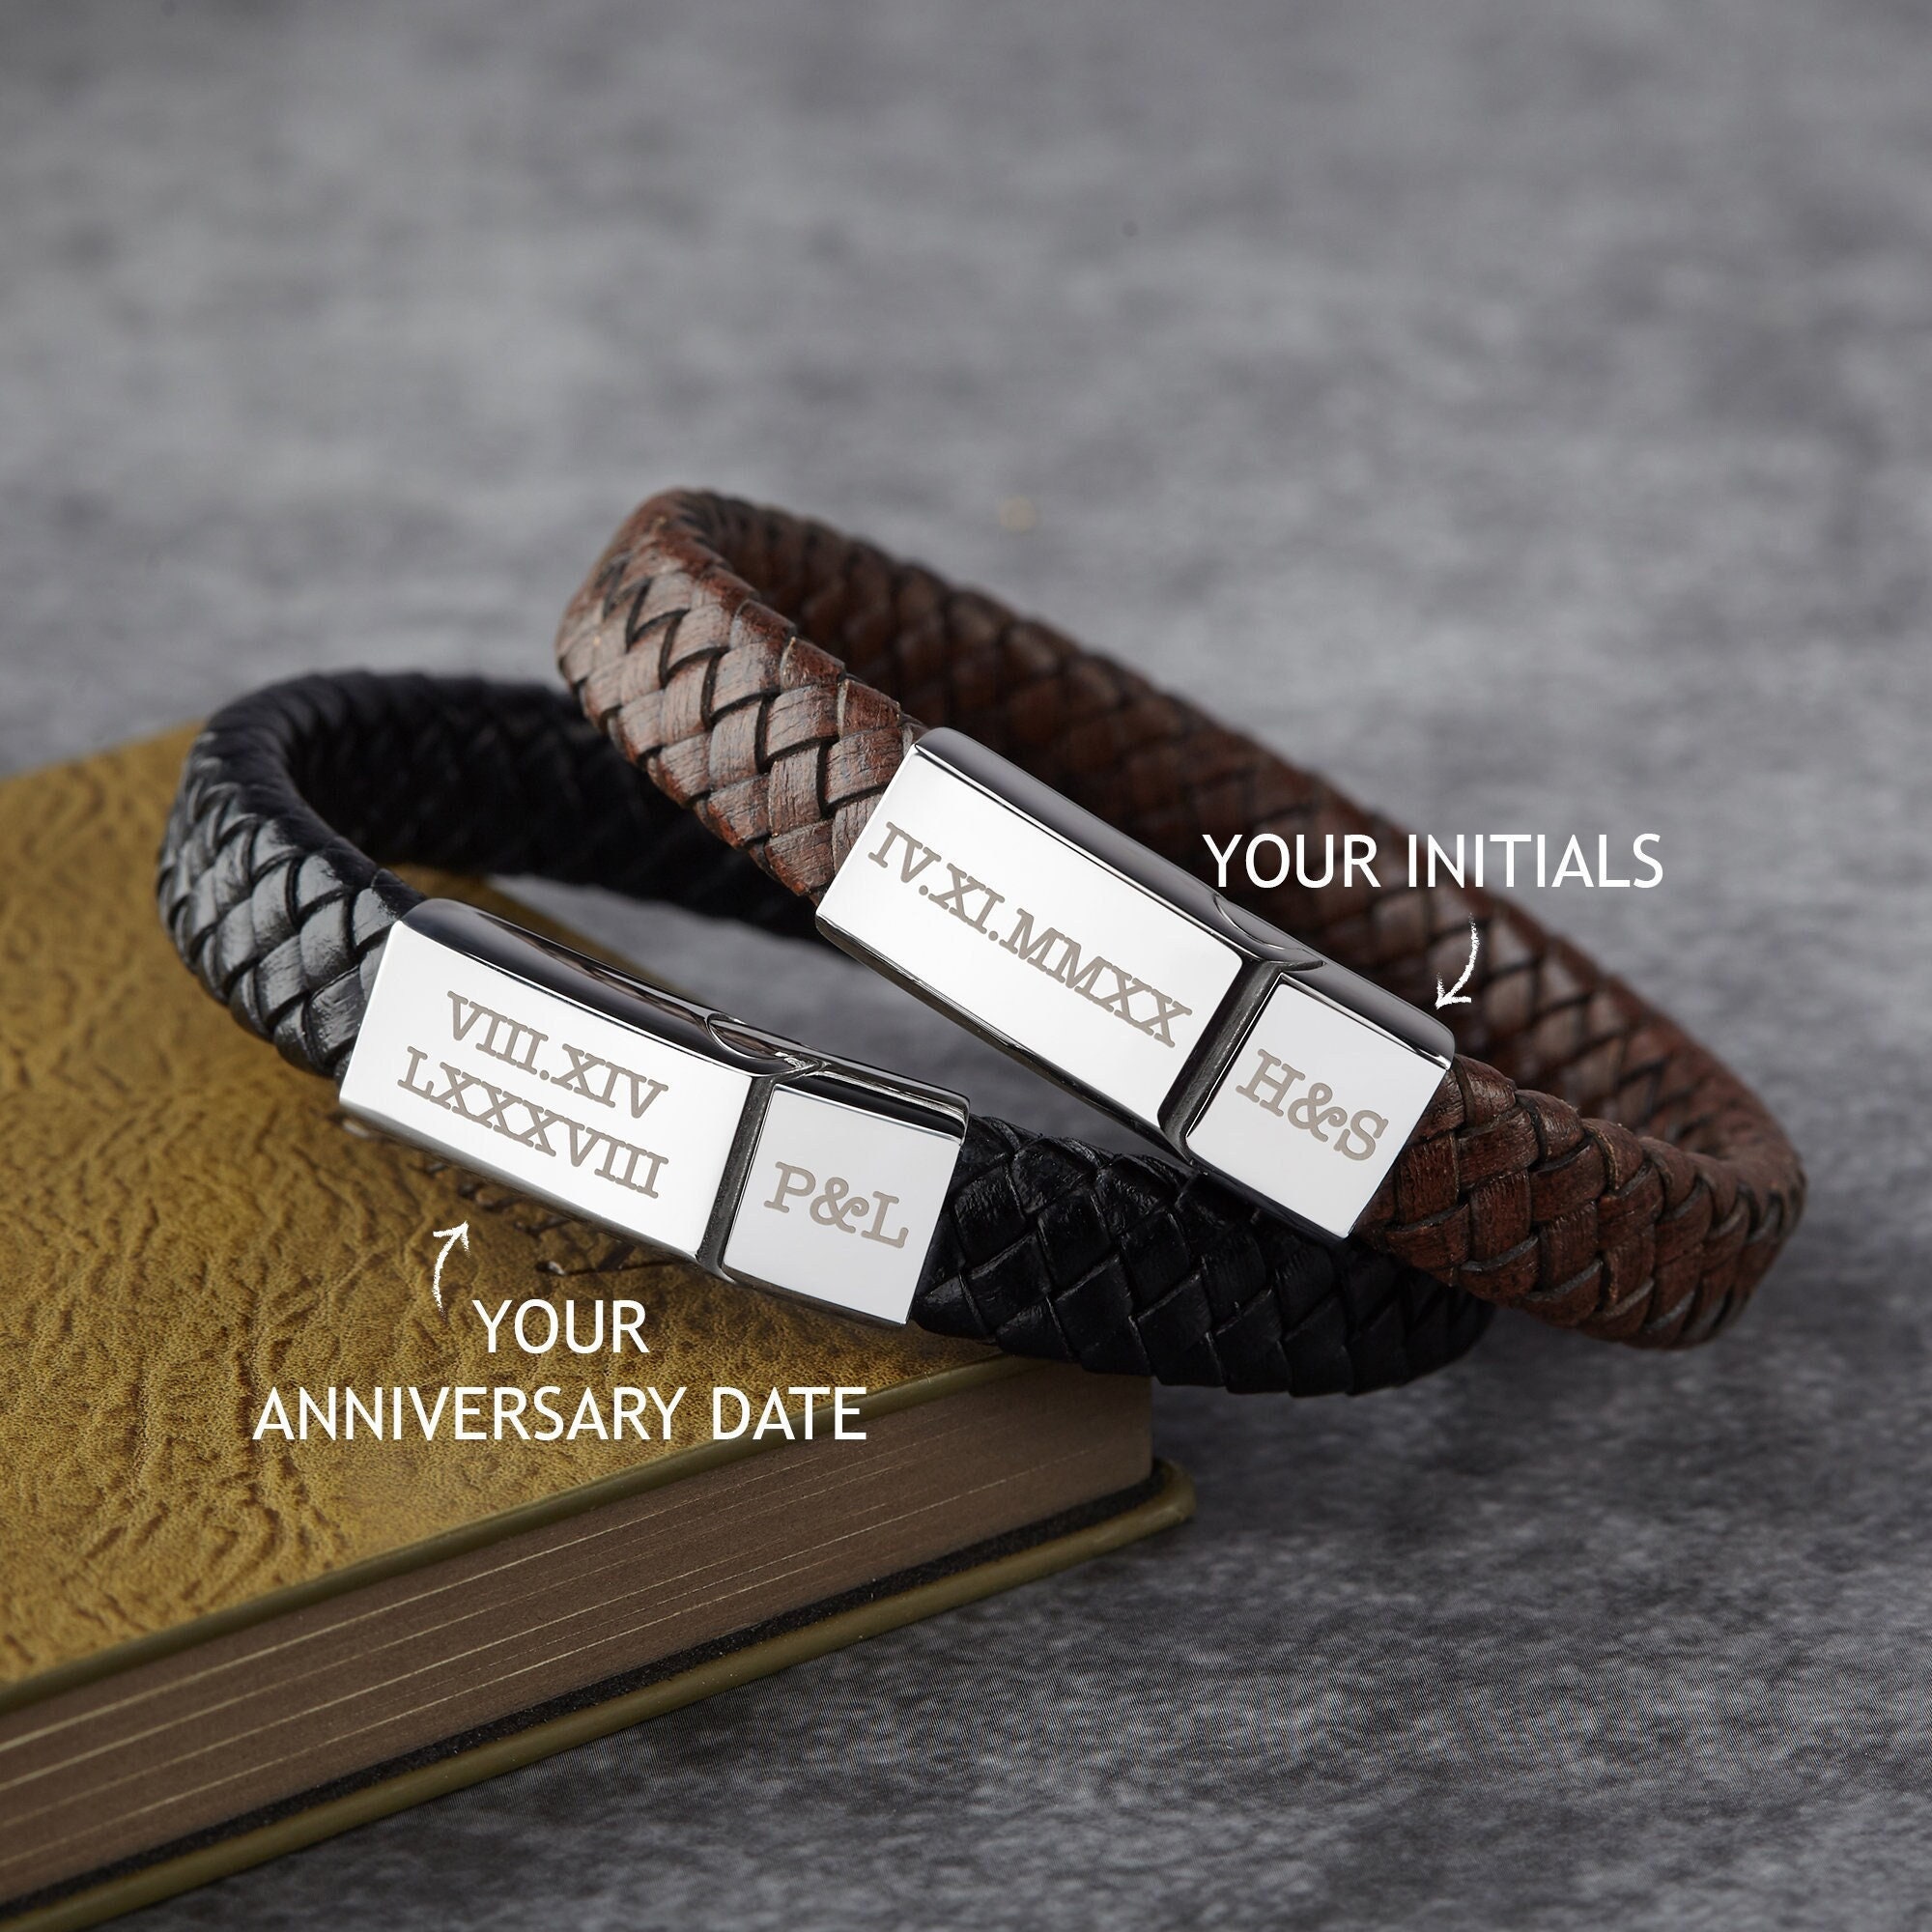 Engraved Mens Bracelet - Braided Leather Bracelet - Christmas Gifts for Dad - Christmas Gifts for Men Regalos Para Hombres 3 Year Anniversary Gift